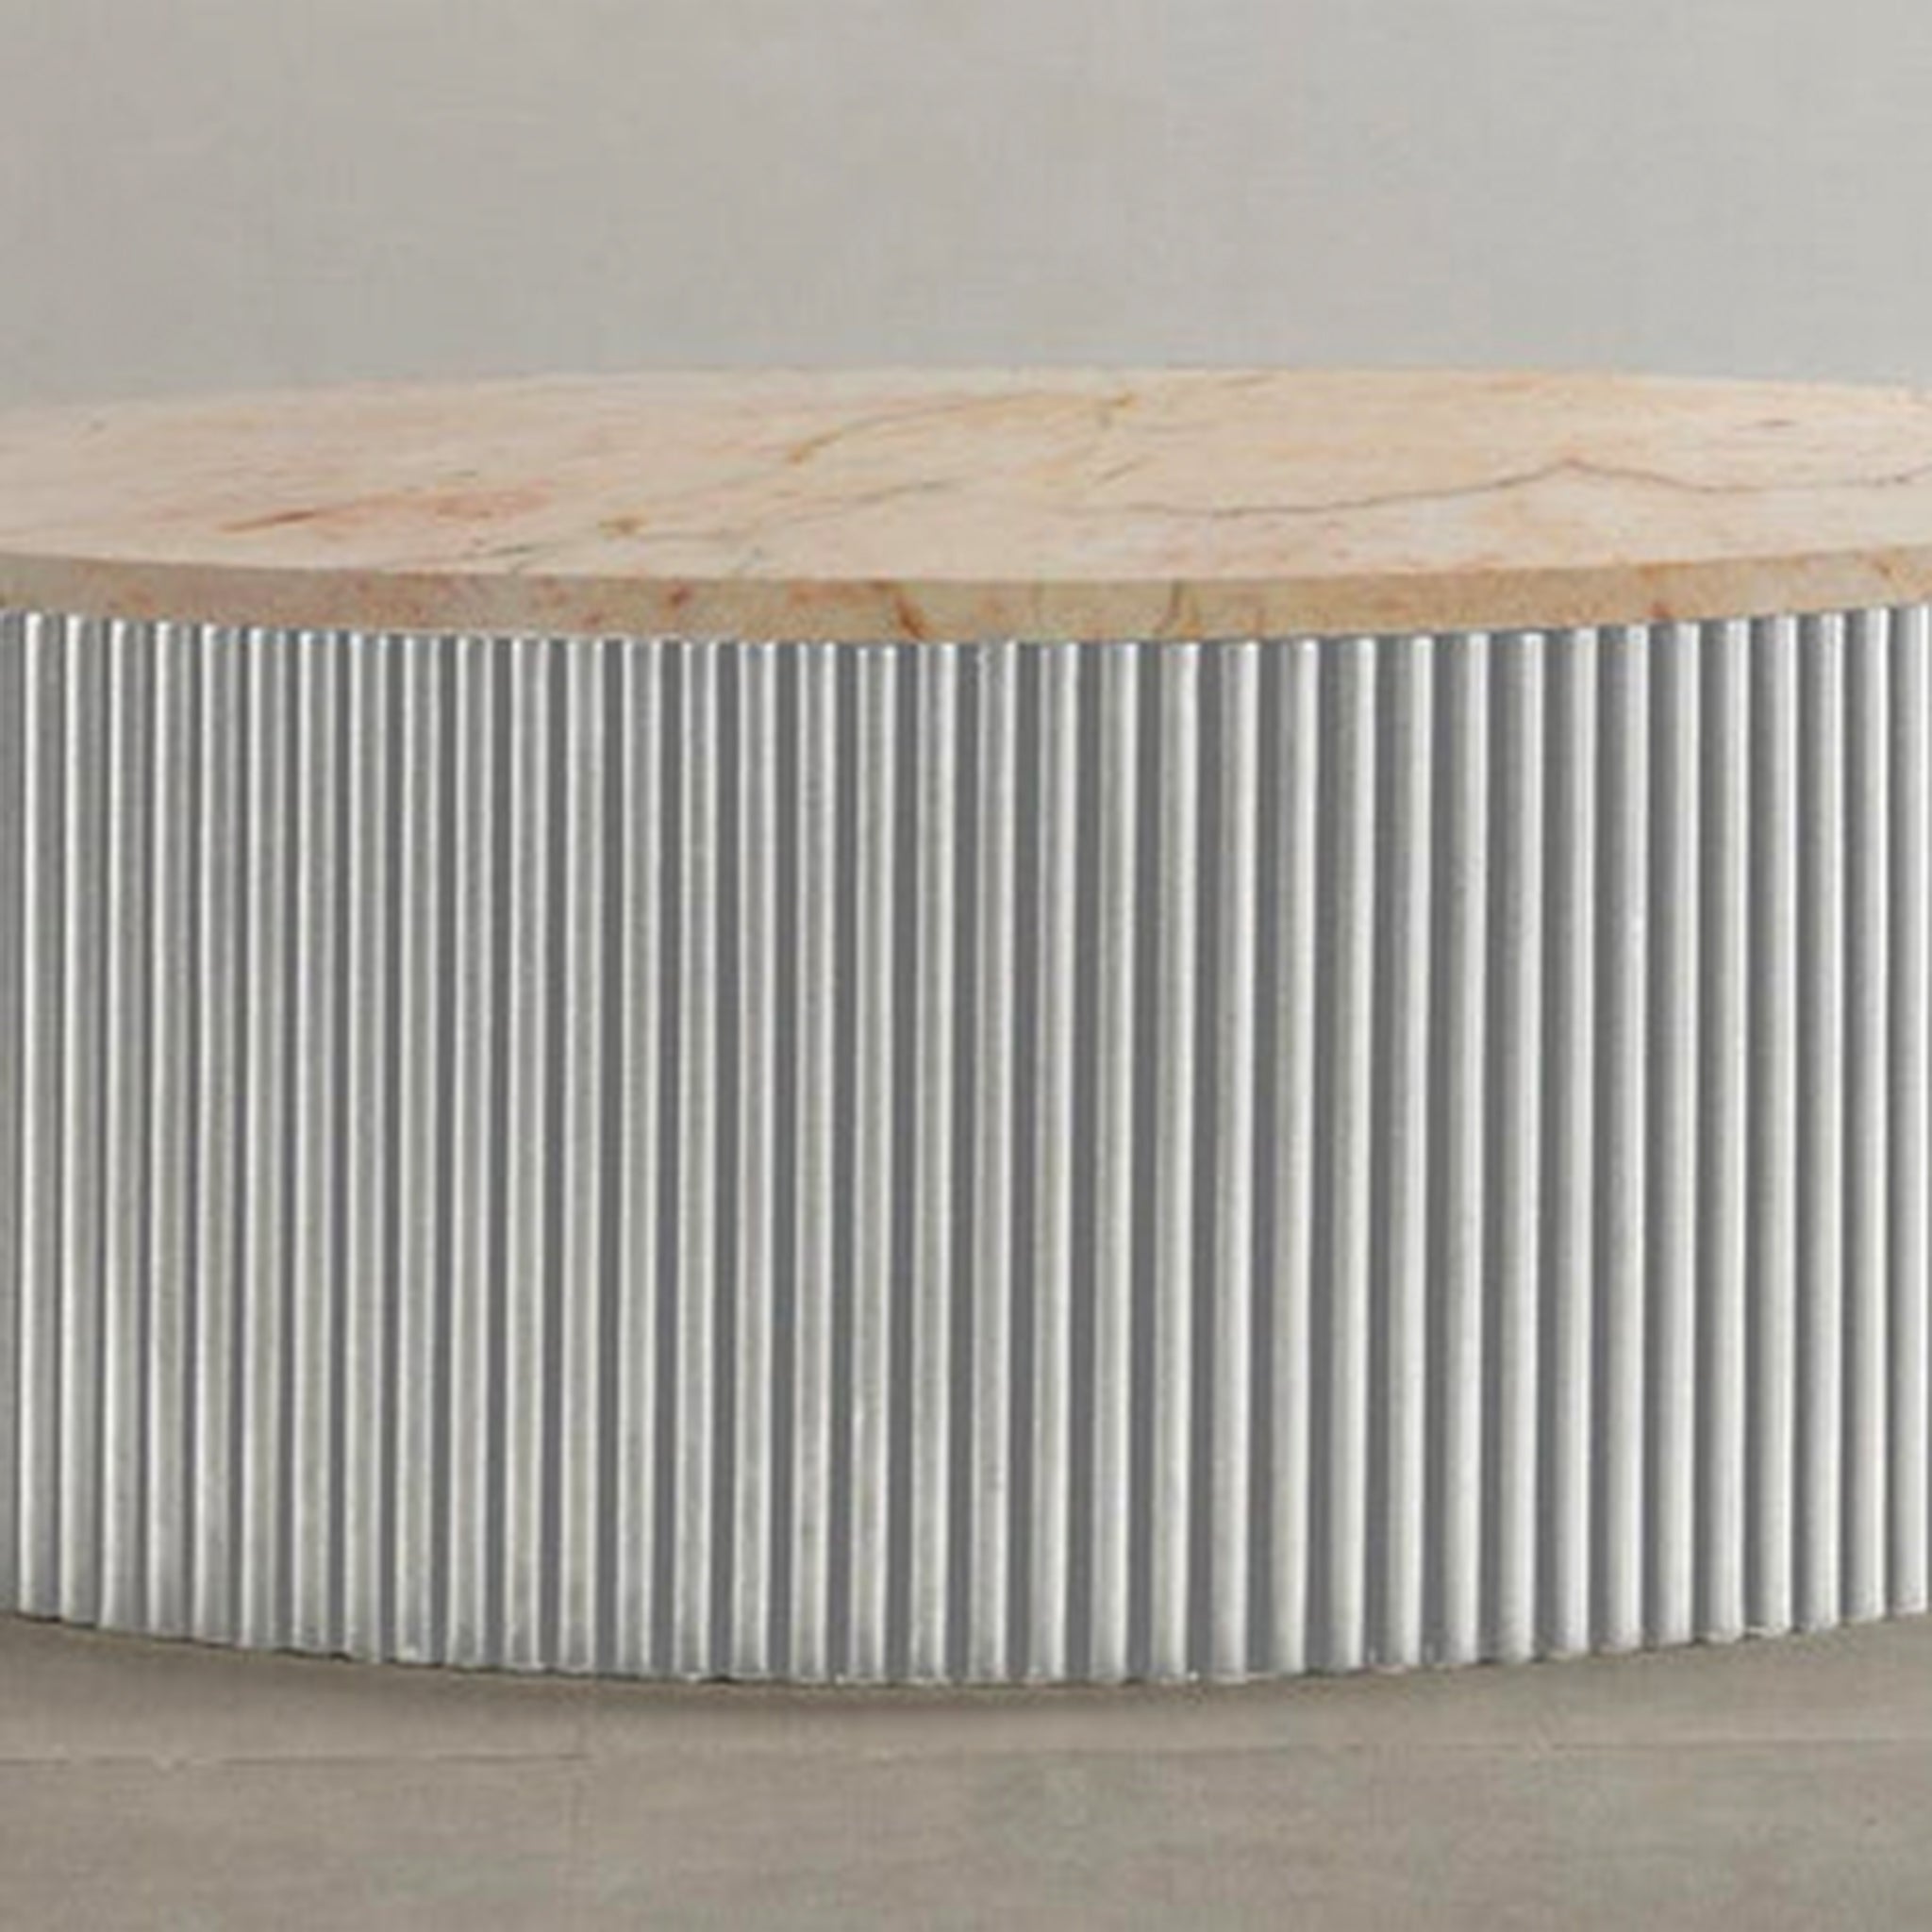 "Contemporary circular coffee table with vertical ribs"